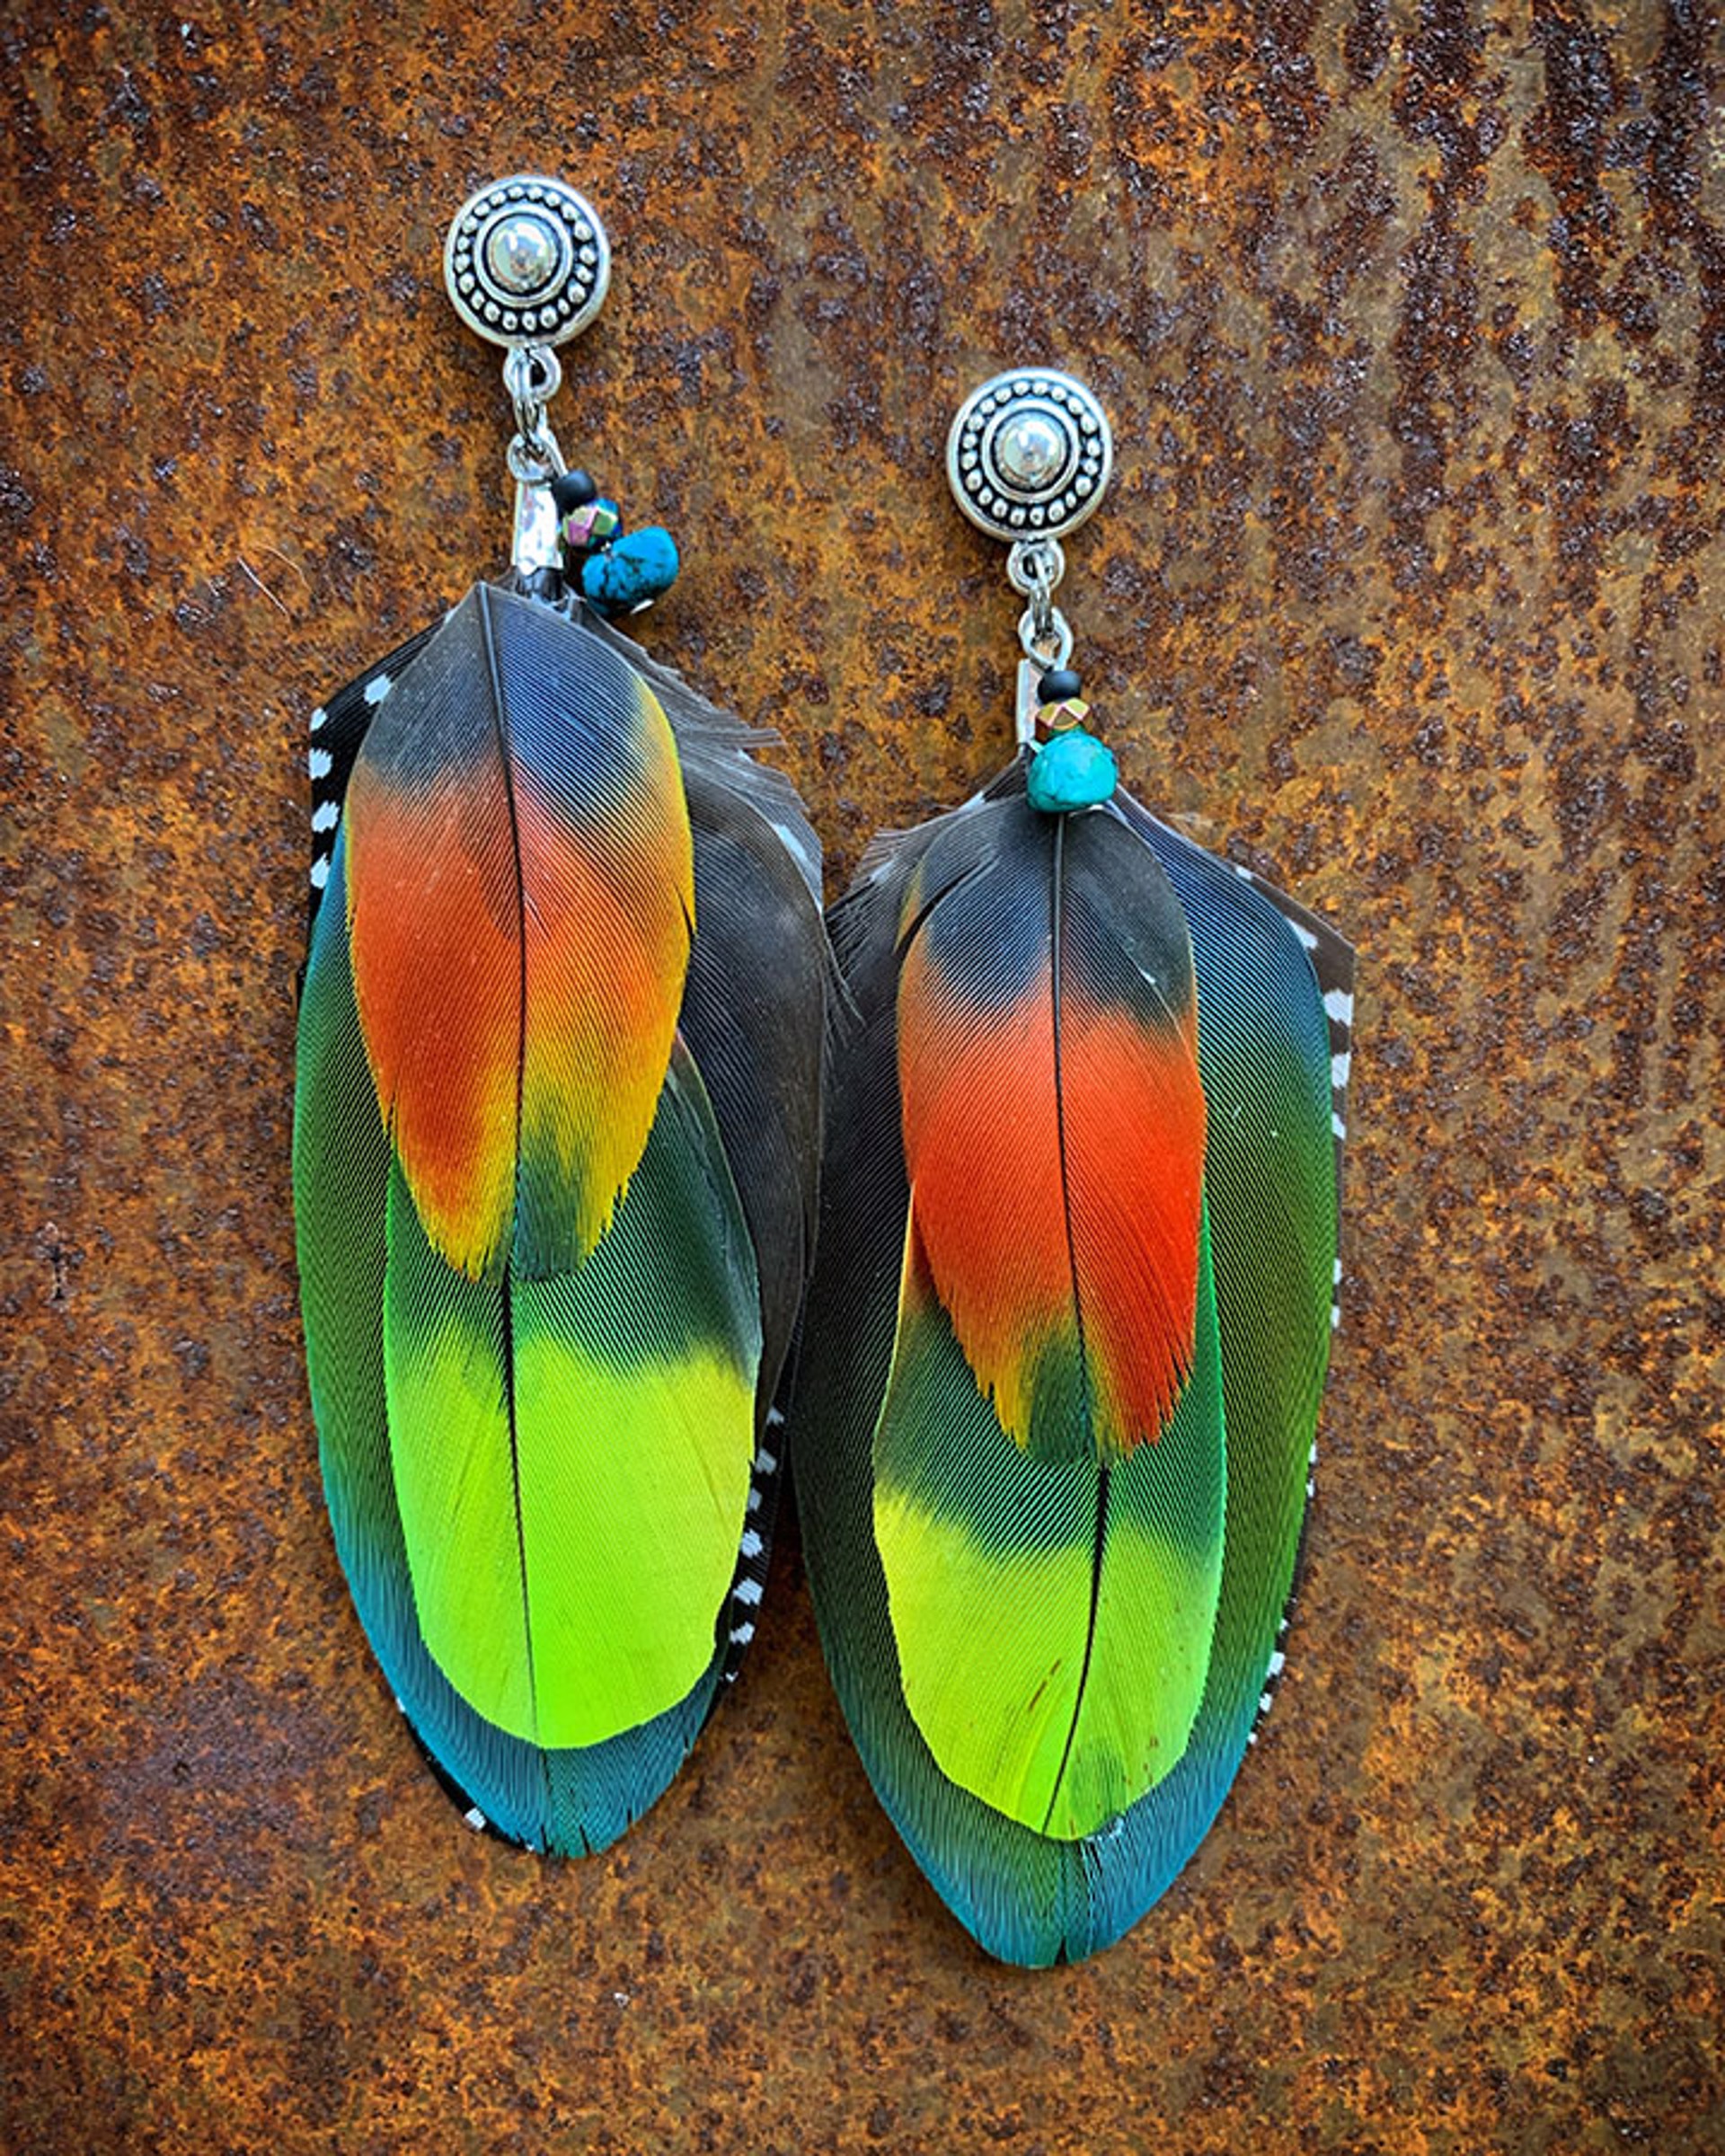 K656 Lime Green Parrot Earrings by Kelly Ormsby